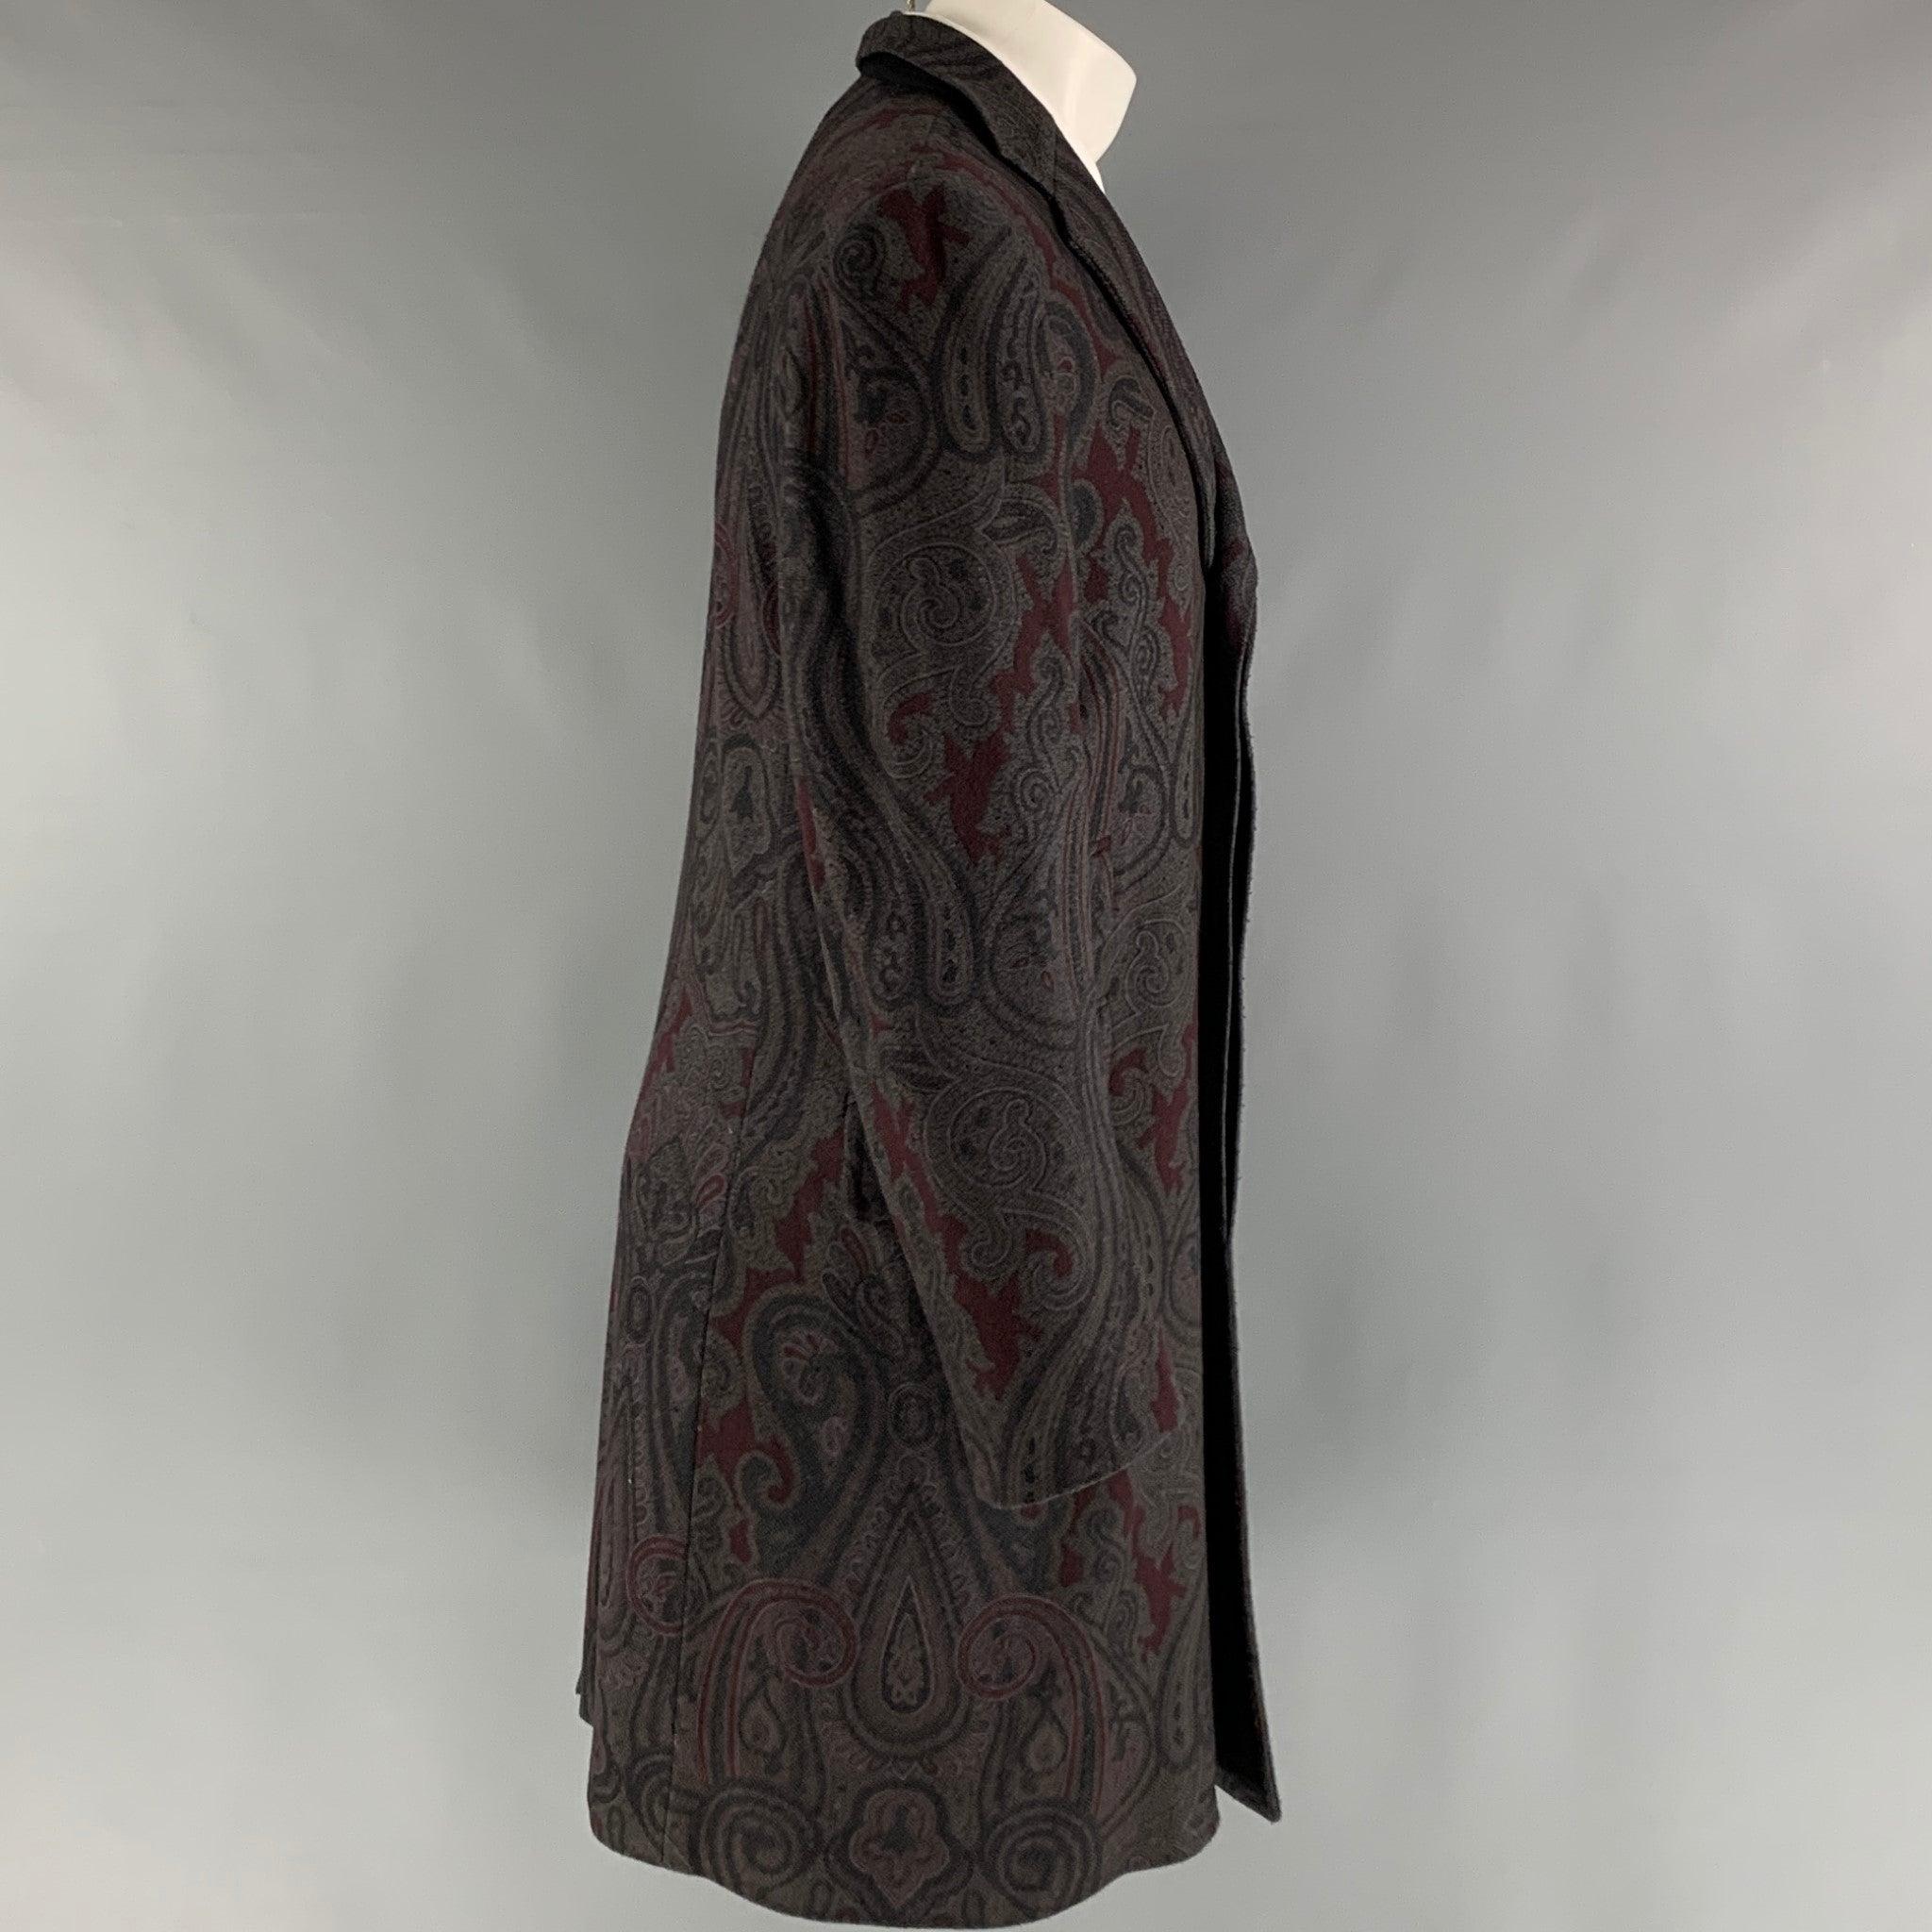 ETRO coat comes in a grey and burgundy wool and polyamide woven material with a full liner featuring a paisley motif, notch lapel, flap pockets, single back vent, and a button closure. Made in Italy.Excellent Pre-Owned Condition. 

Marked:  50